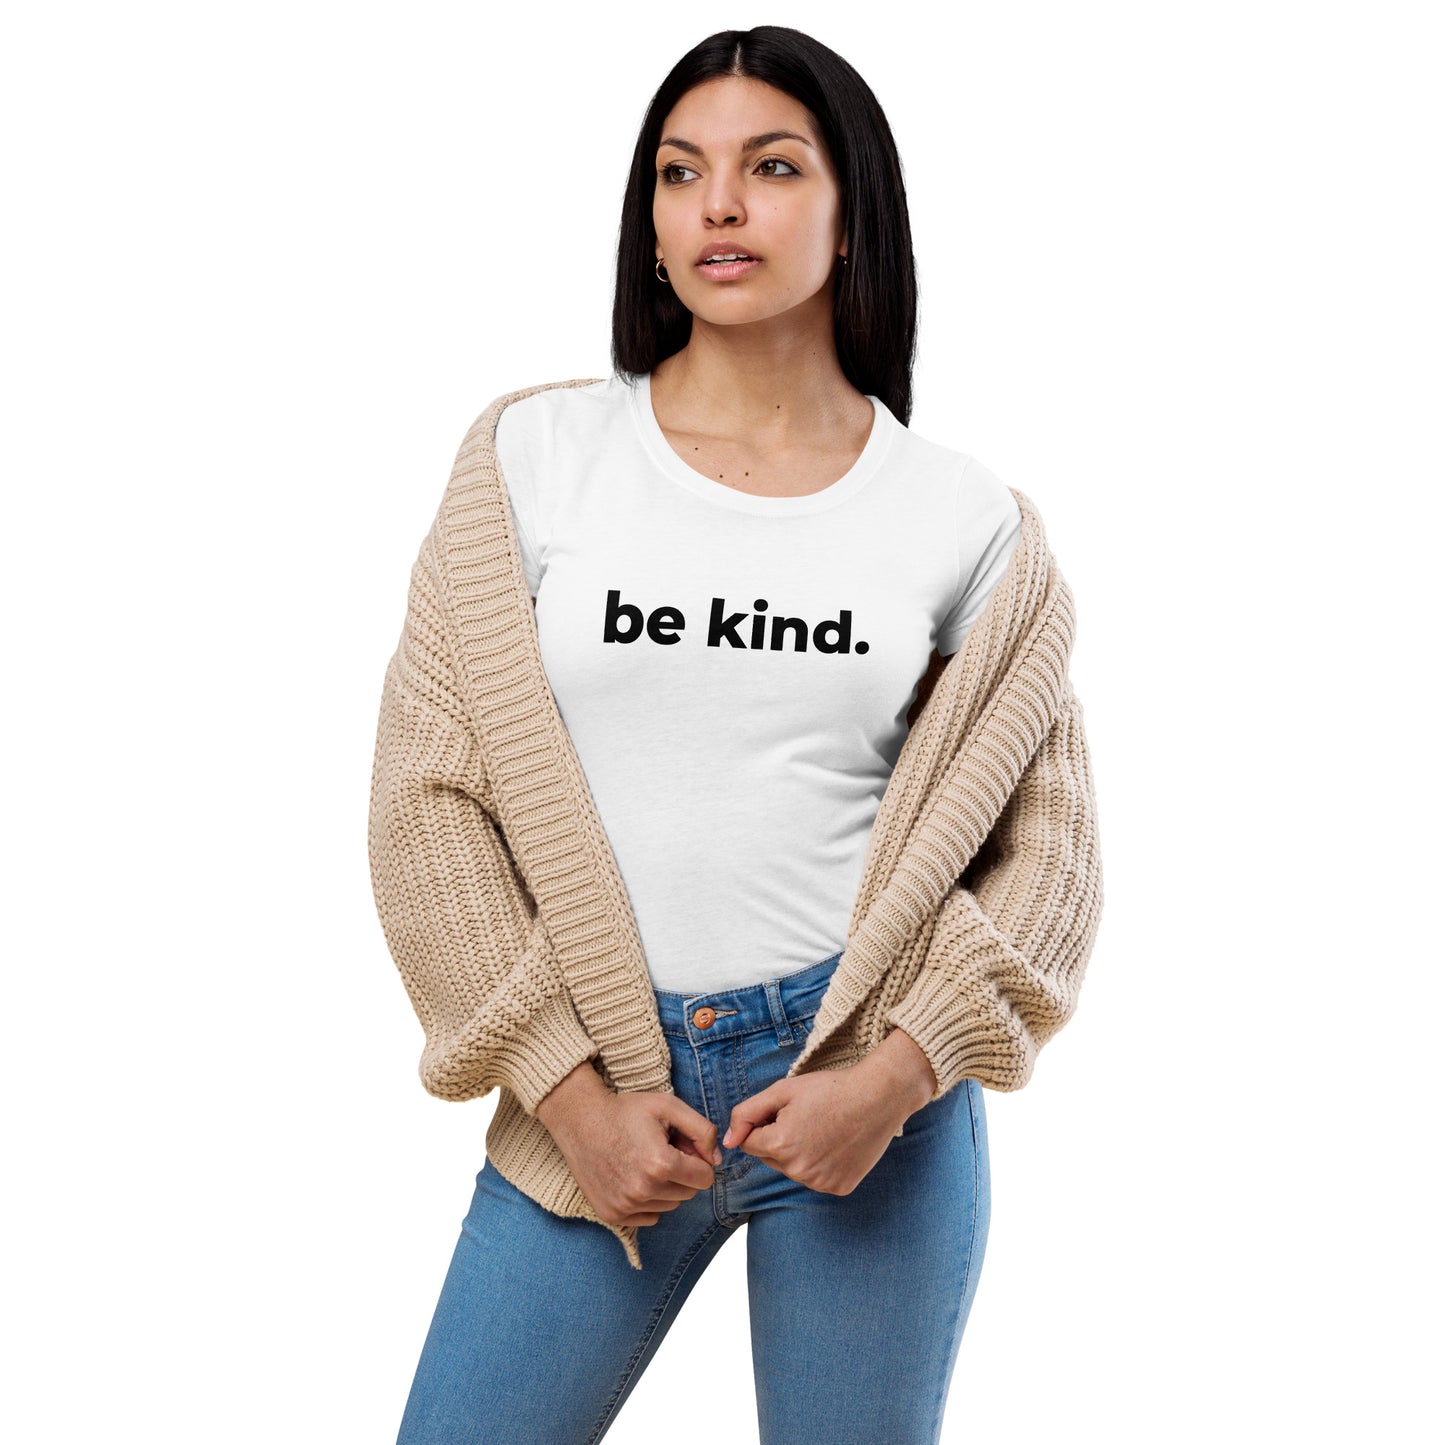 BE KIND - Women’s fitted t-shirt